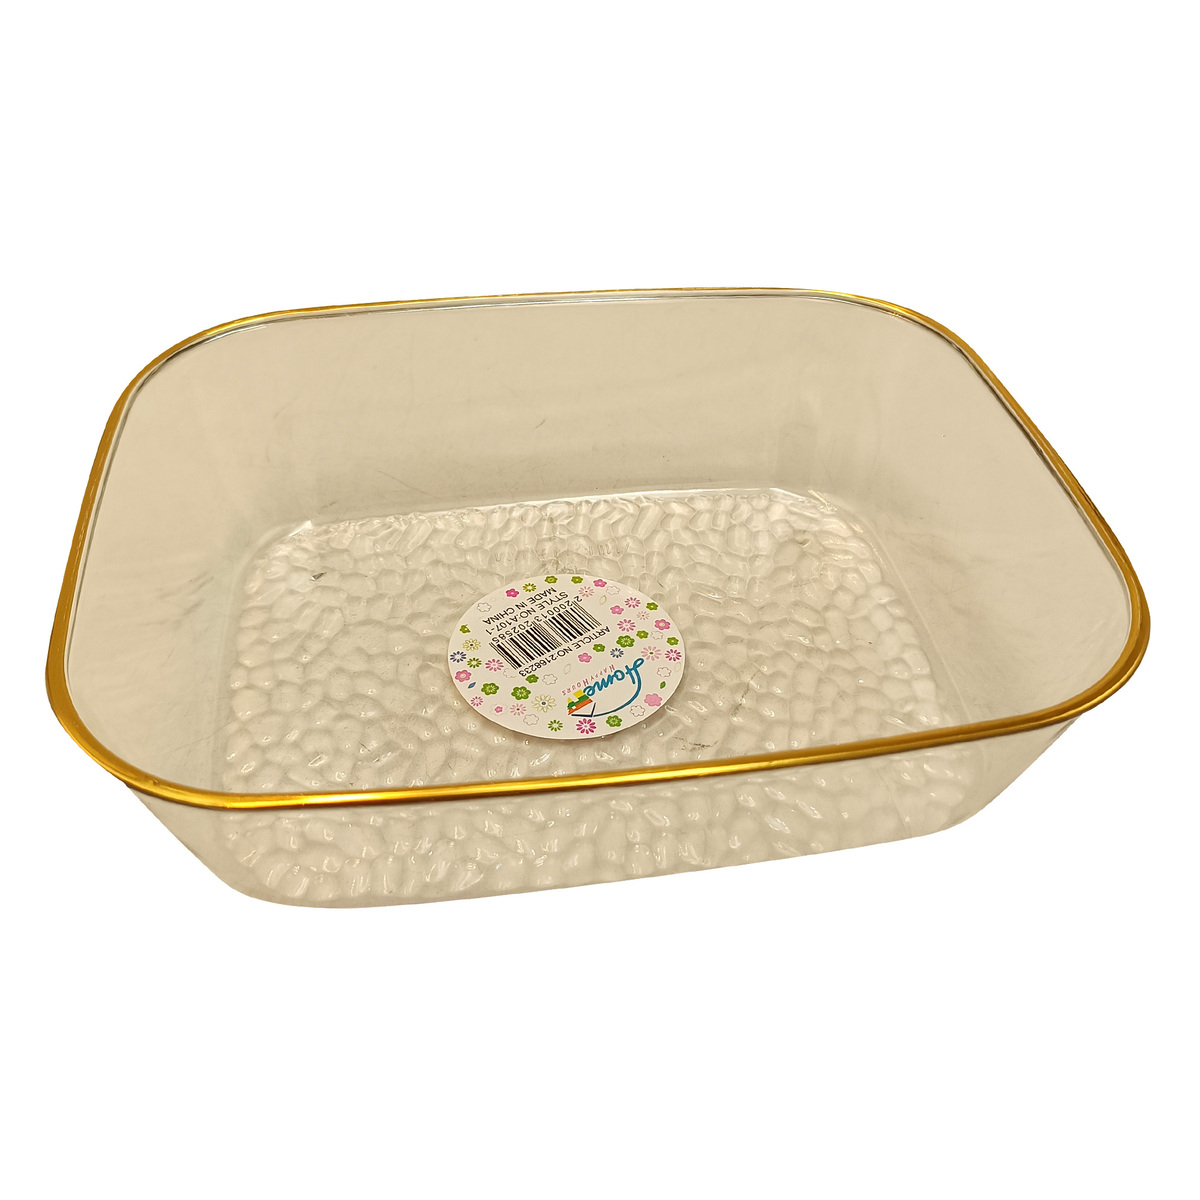 Home Plastic Serving Tray, 20 x 16 cm, MKT23/54